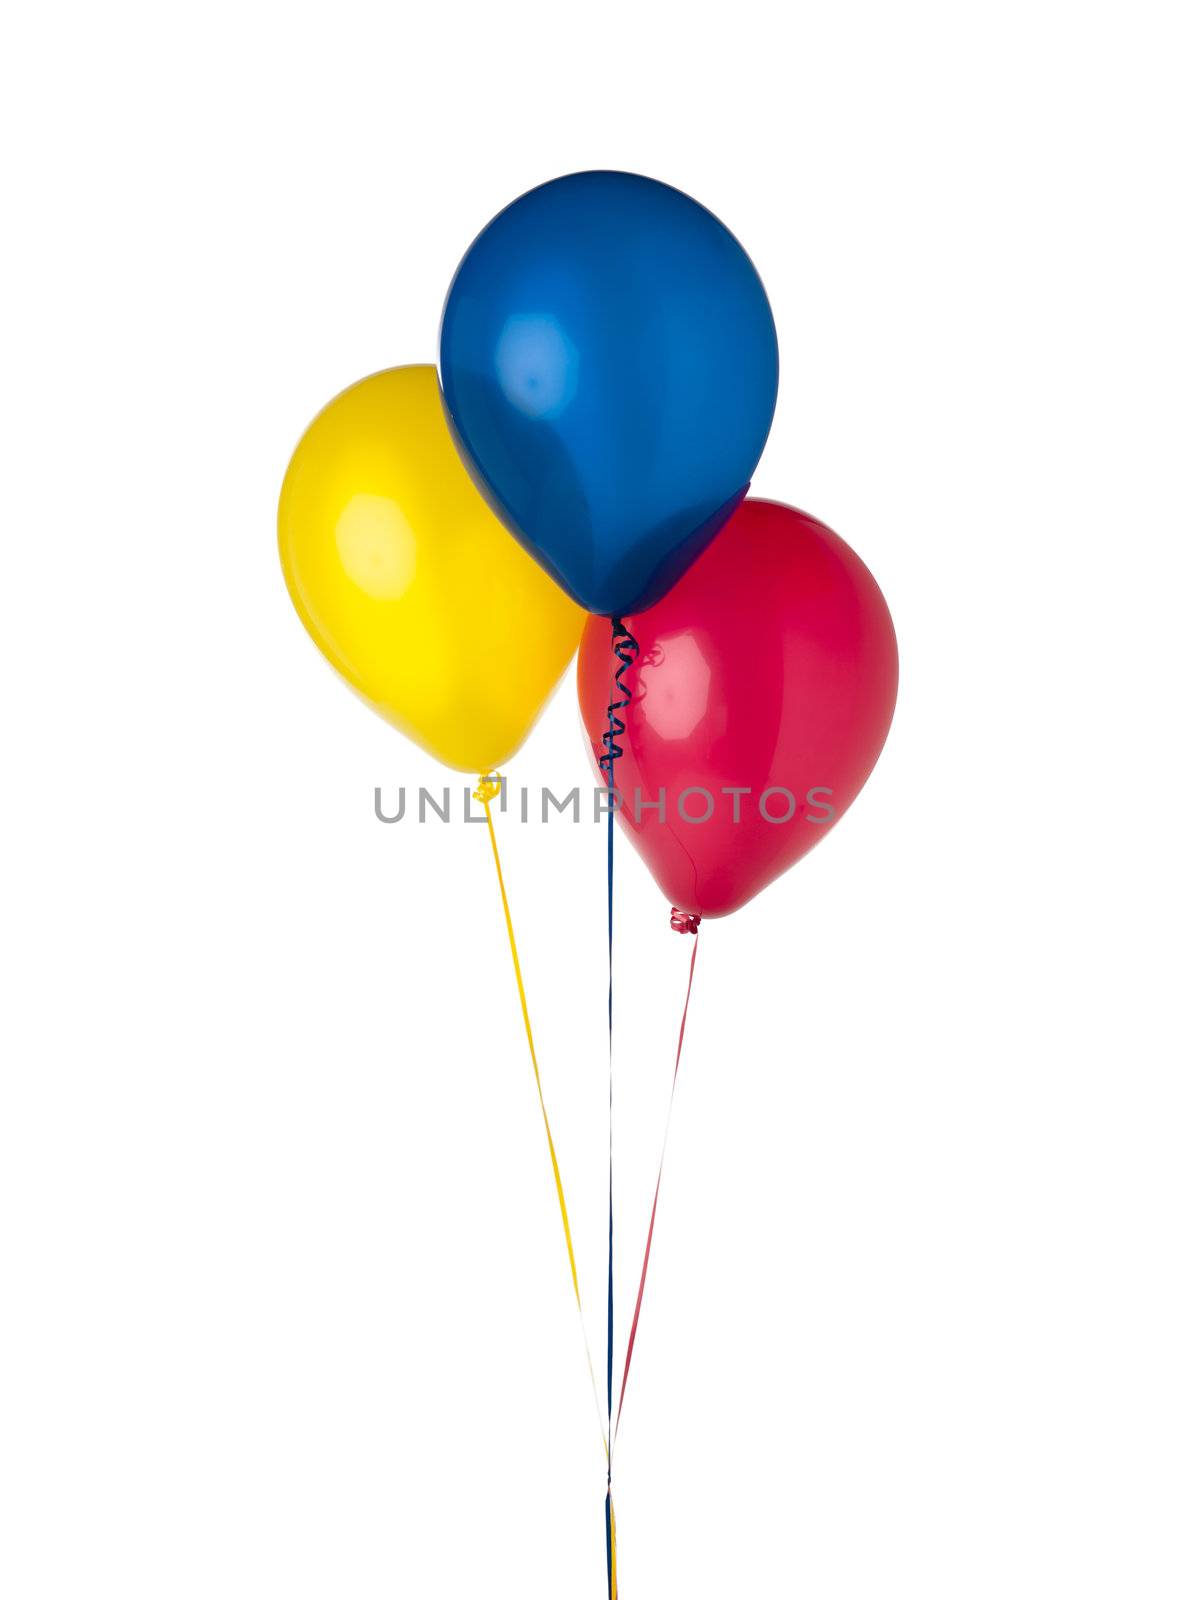 Balloons with different colour photograhed against a white background.